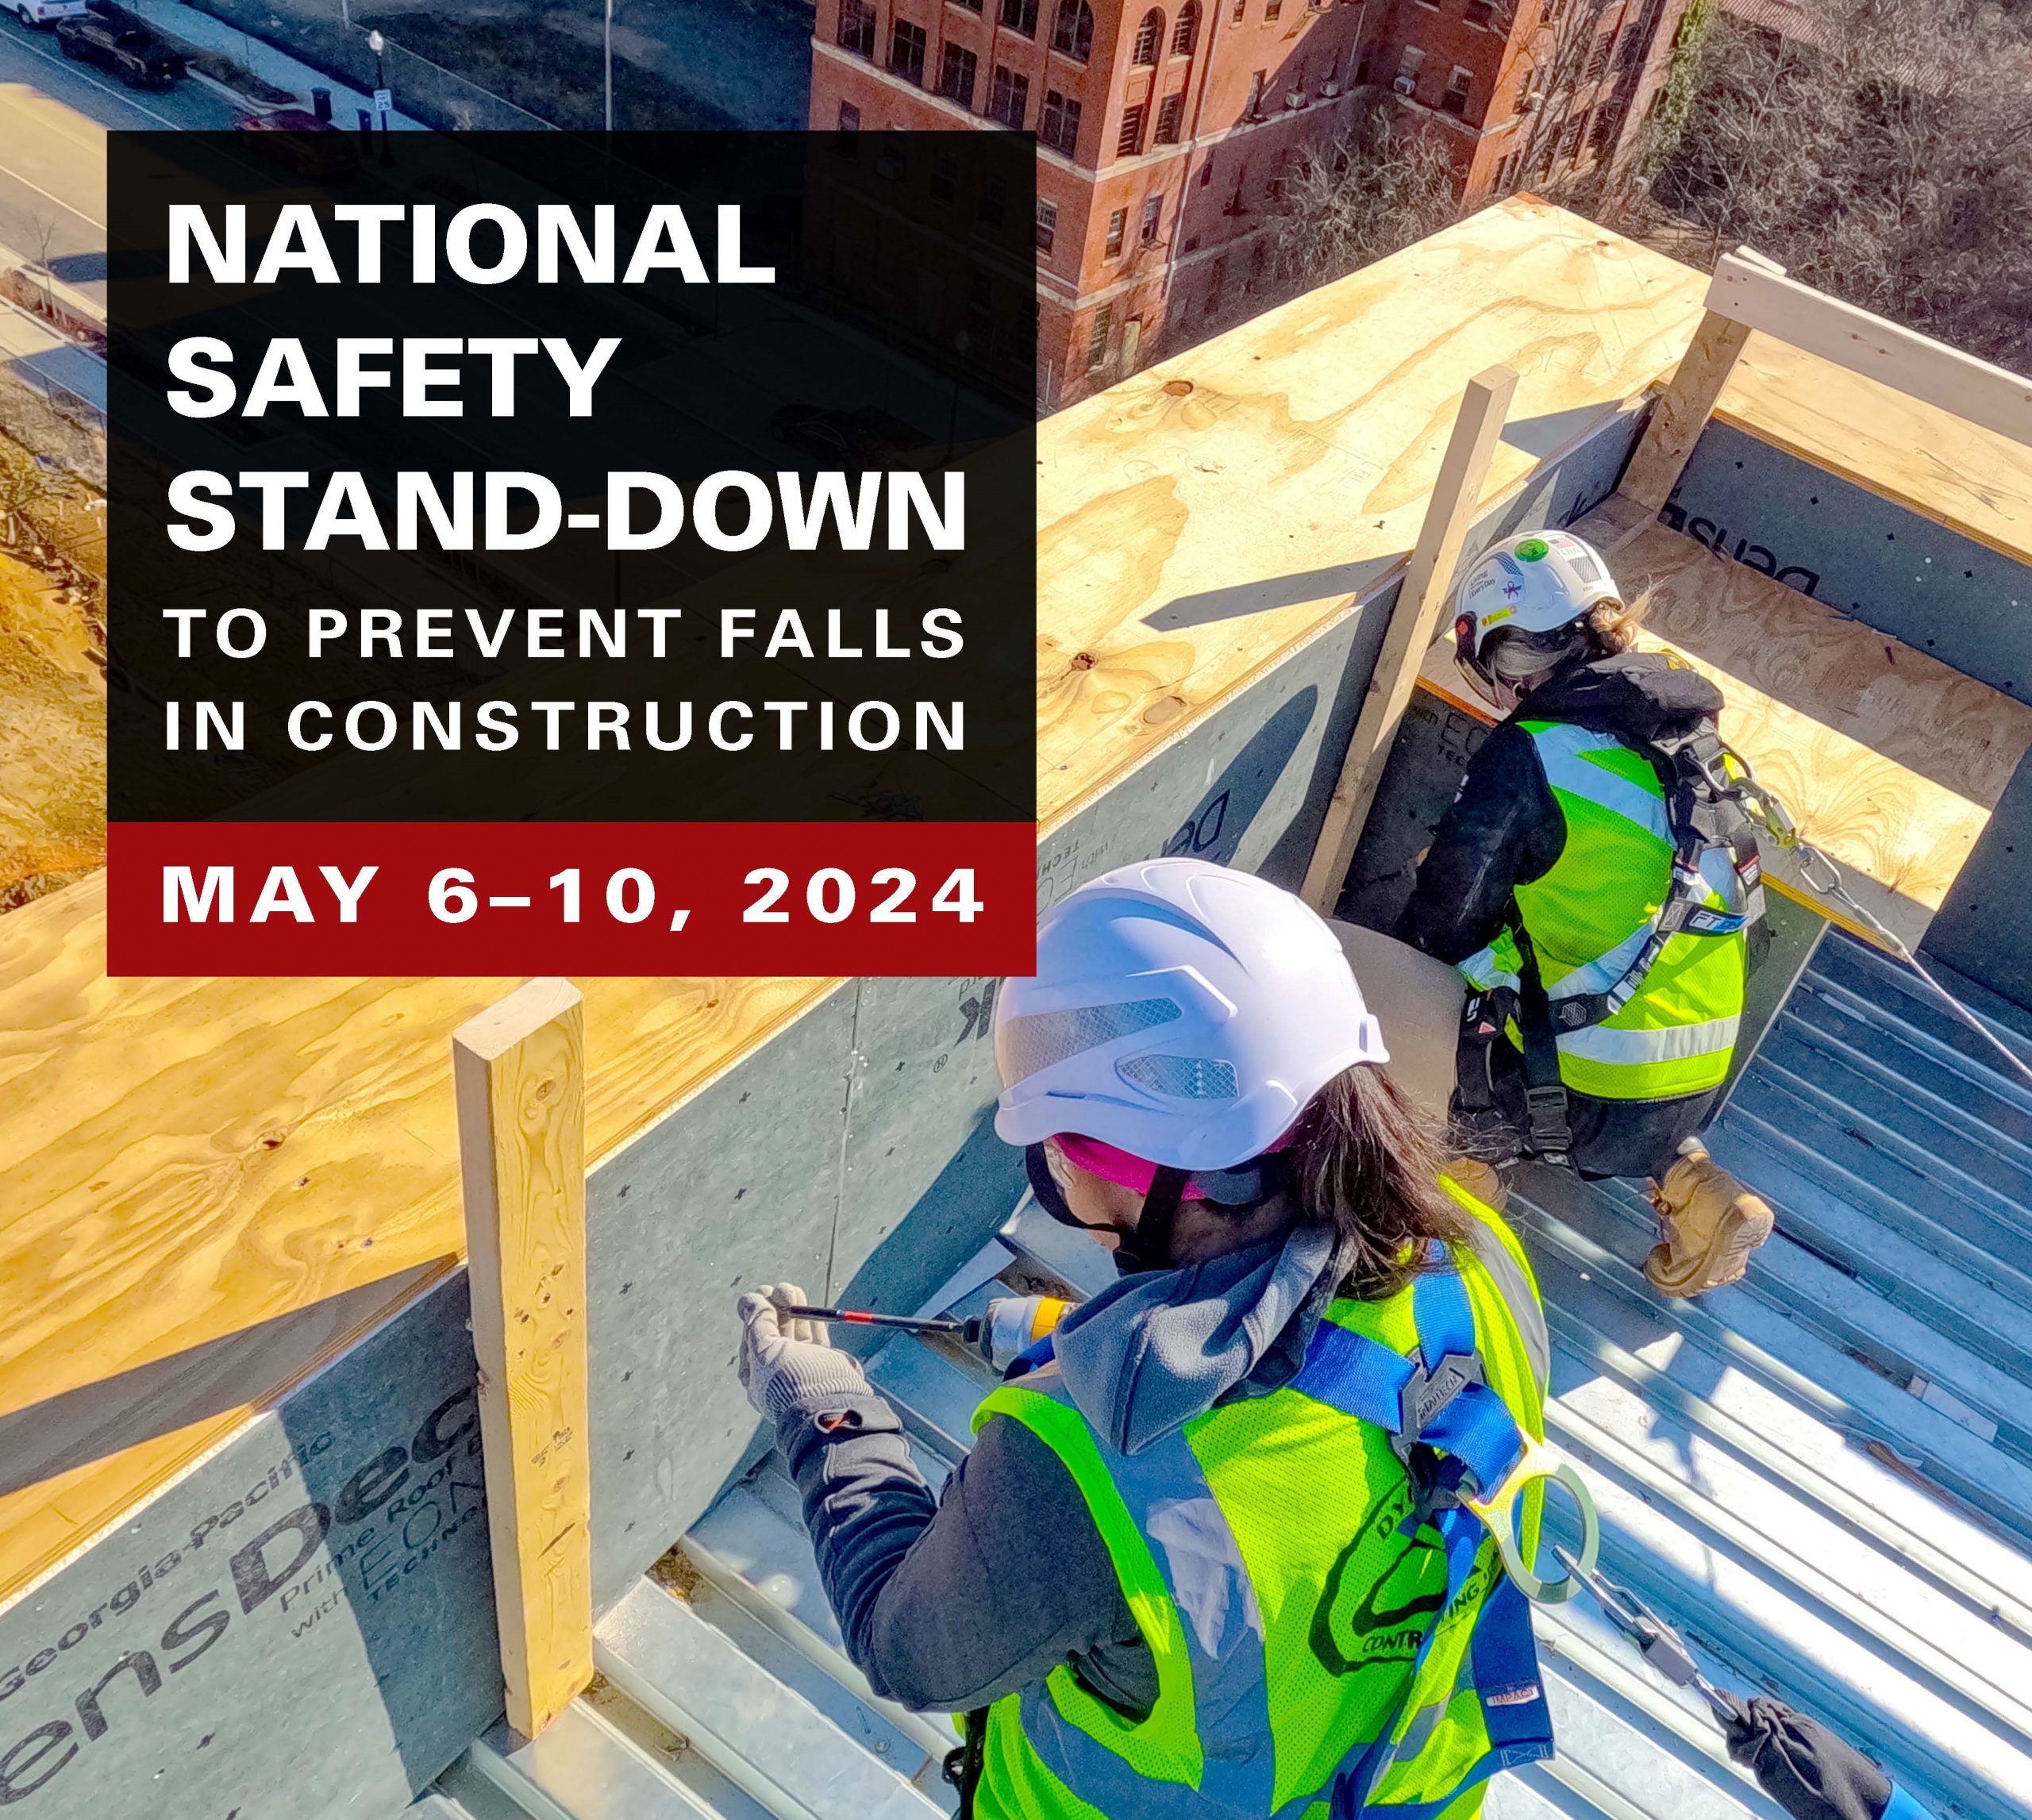 Take Time Out for a Safety Stand-Down